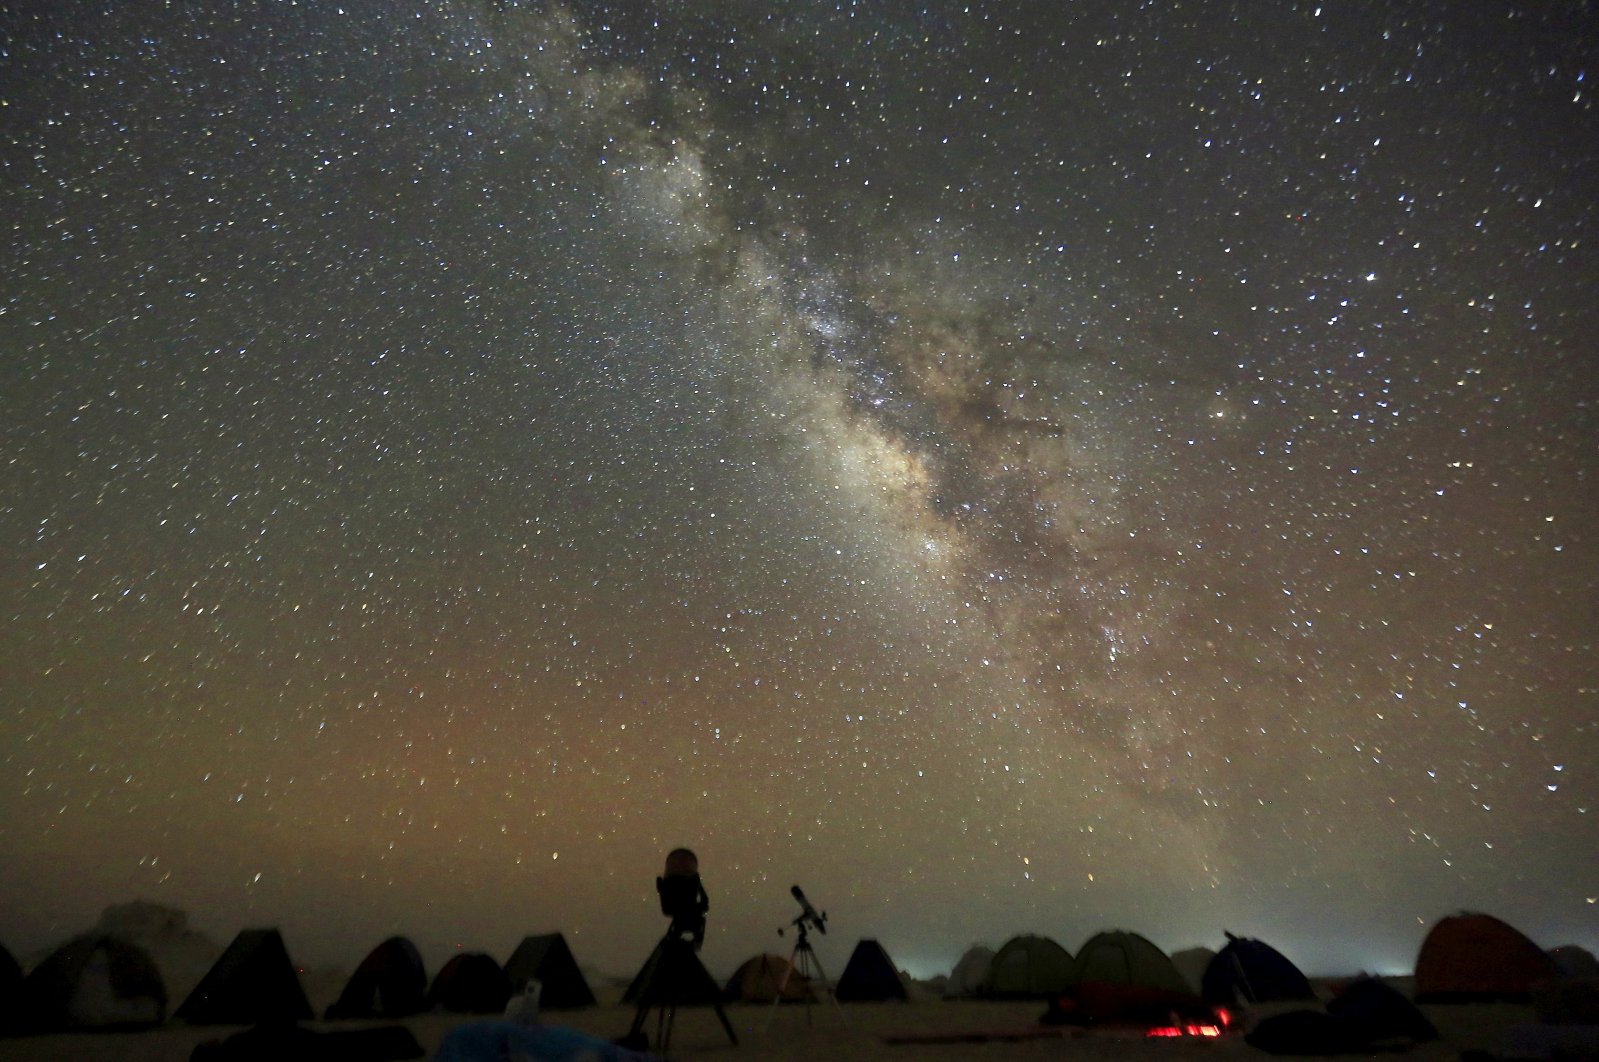 The Milky Way galaxy is seen in the night sky around telescopes and camps of people over rocks in the White Desert north of the Farafra Oasis southwest of Cairo, Egypt, May 16, 2015. (Reuters Photo)